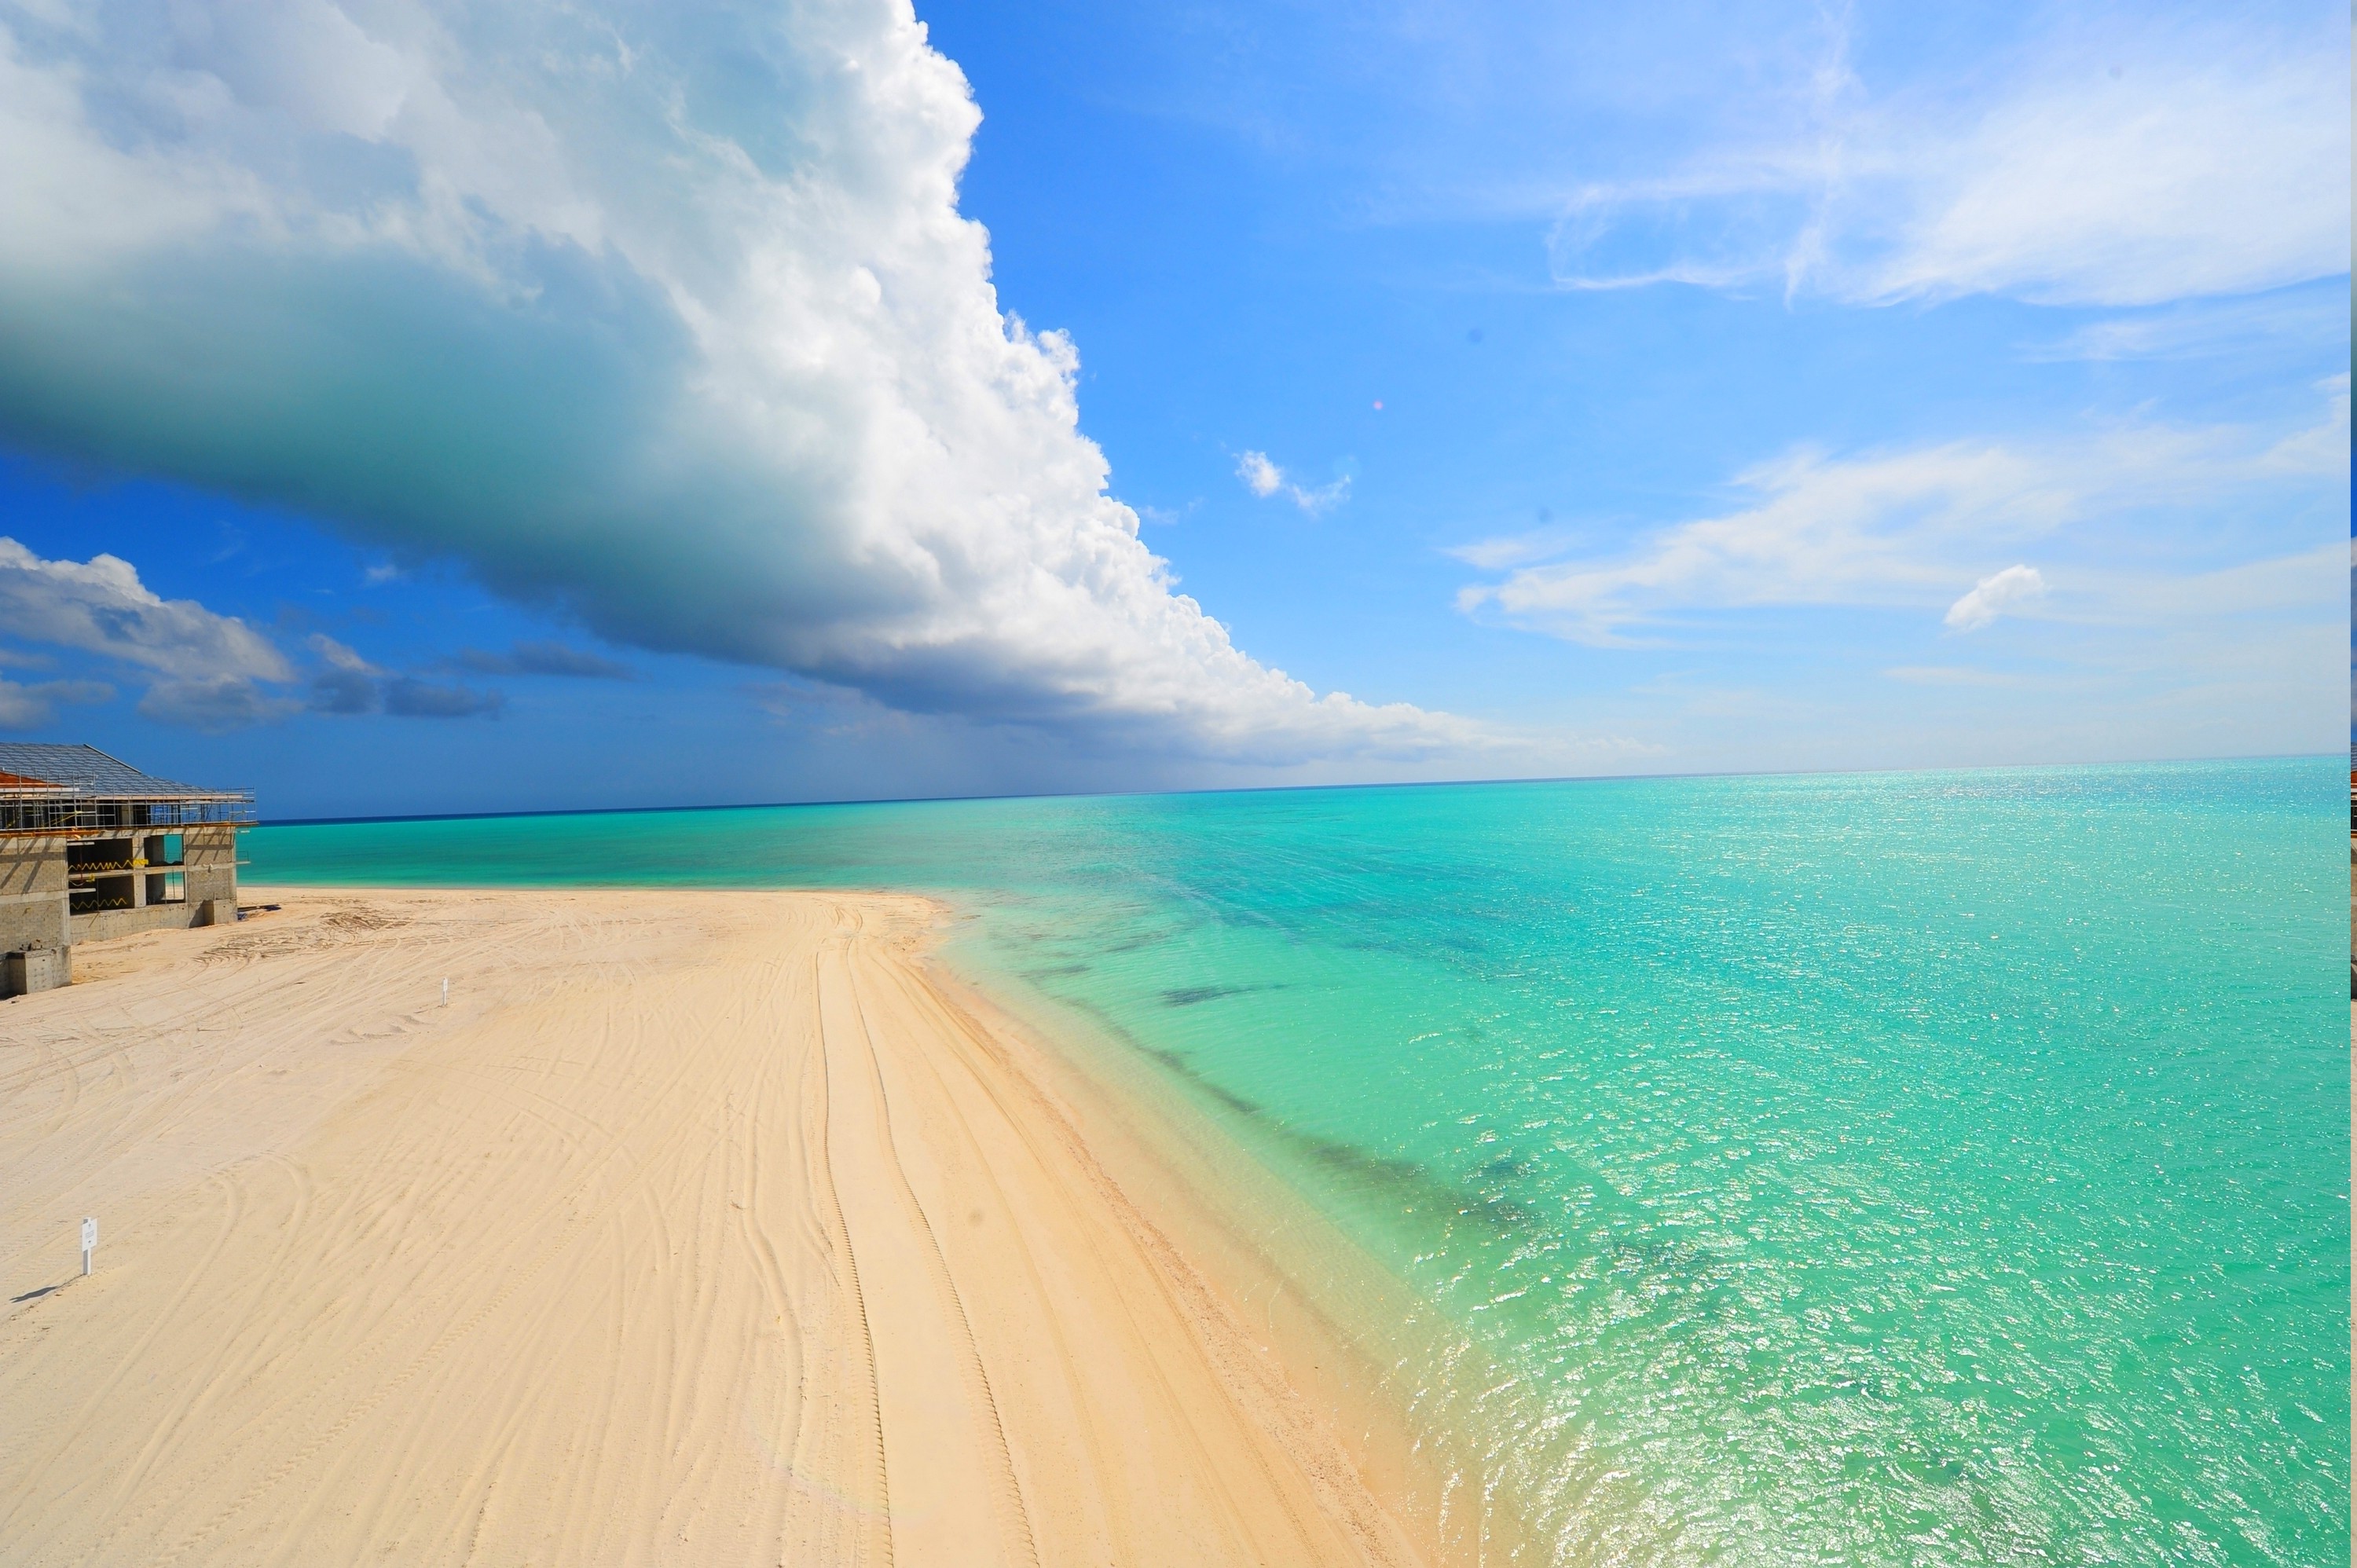 beach, Summer, Sea, Sand, Tropical, Clouds, Turquoise, Caribbean, Vacations, Island, Nature, Landscape Wallpaper